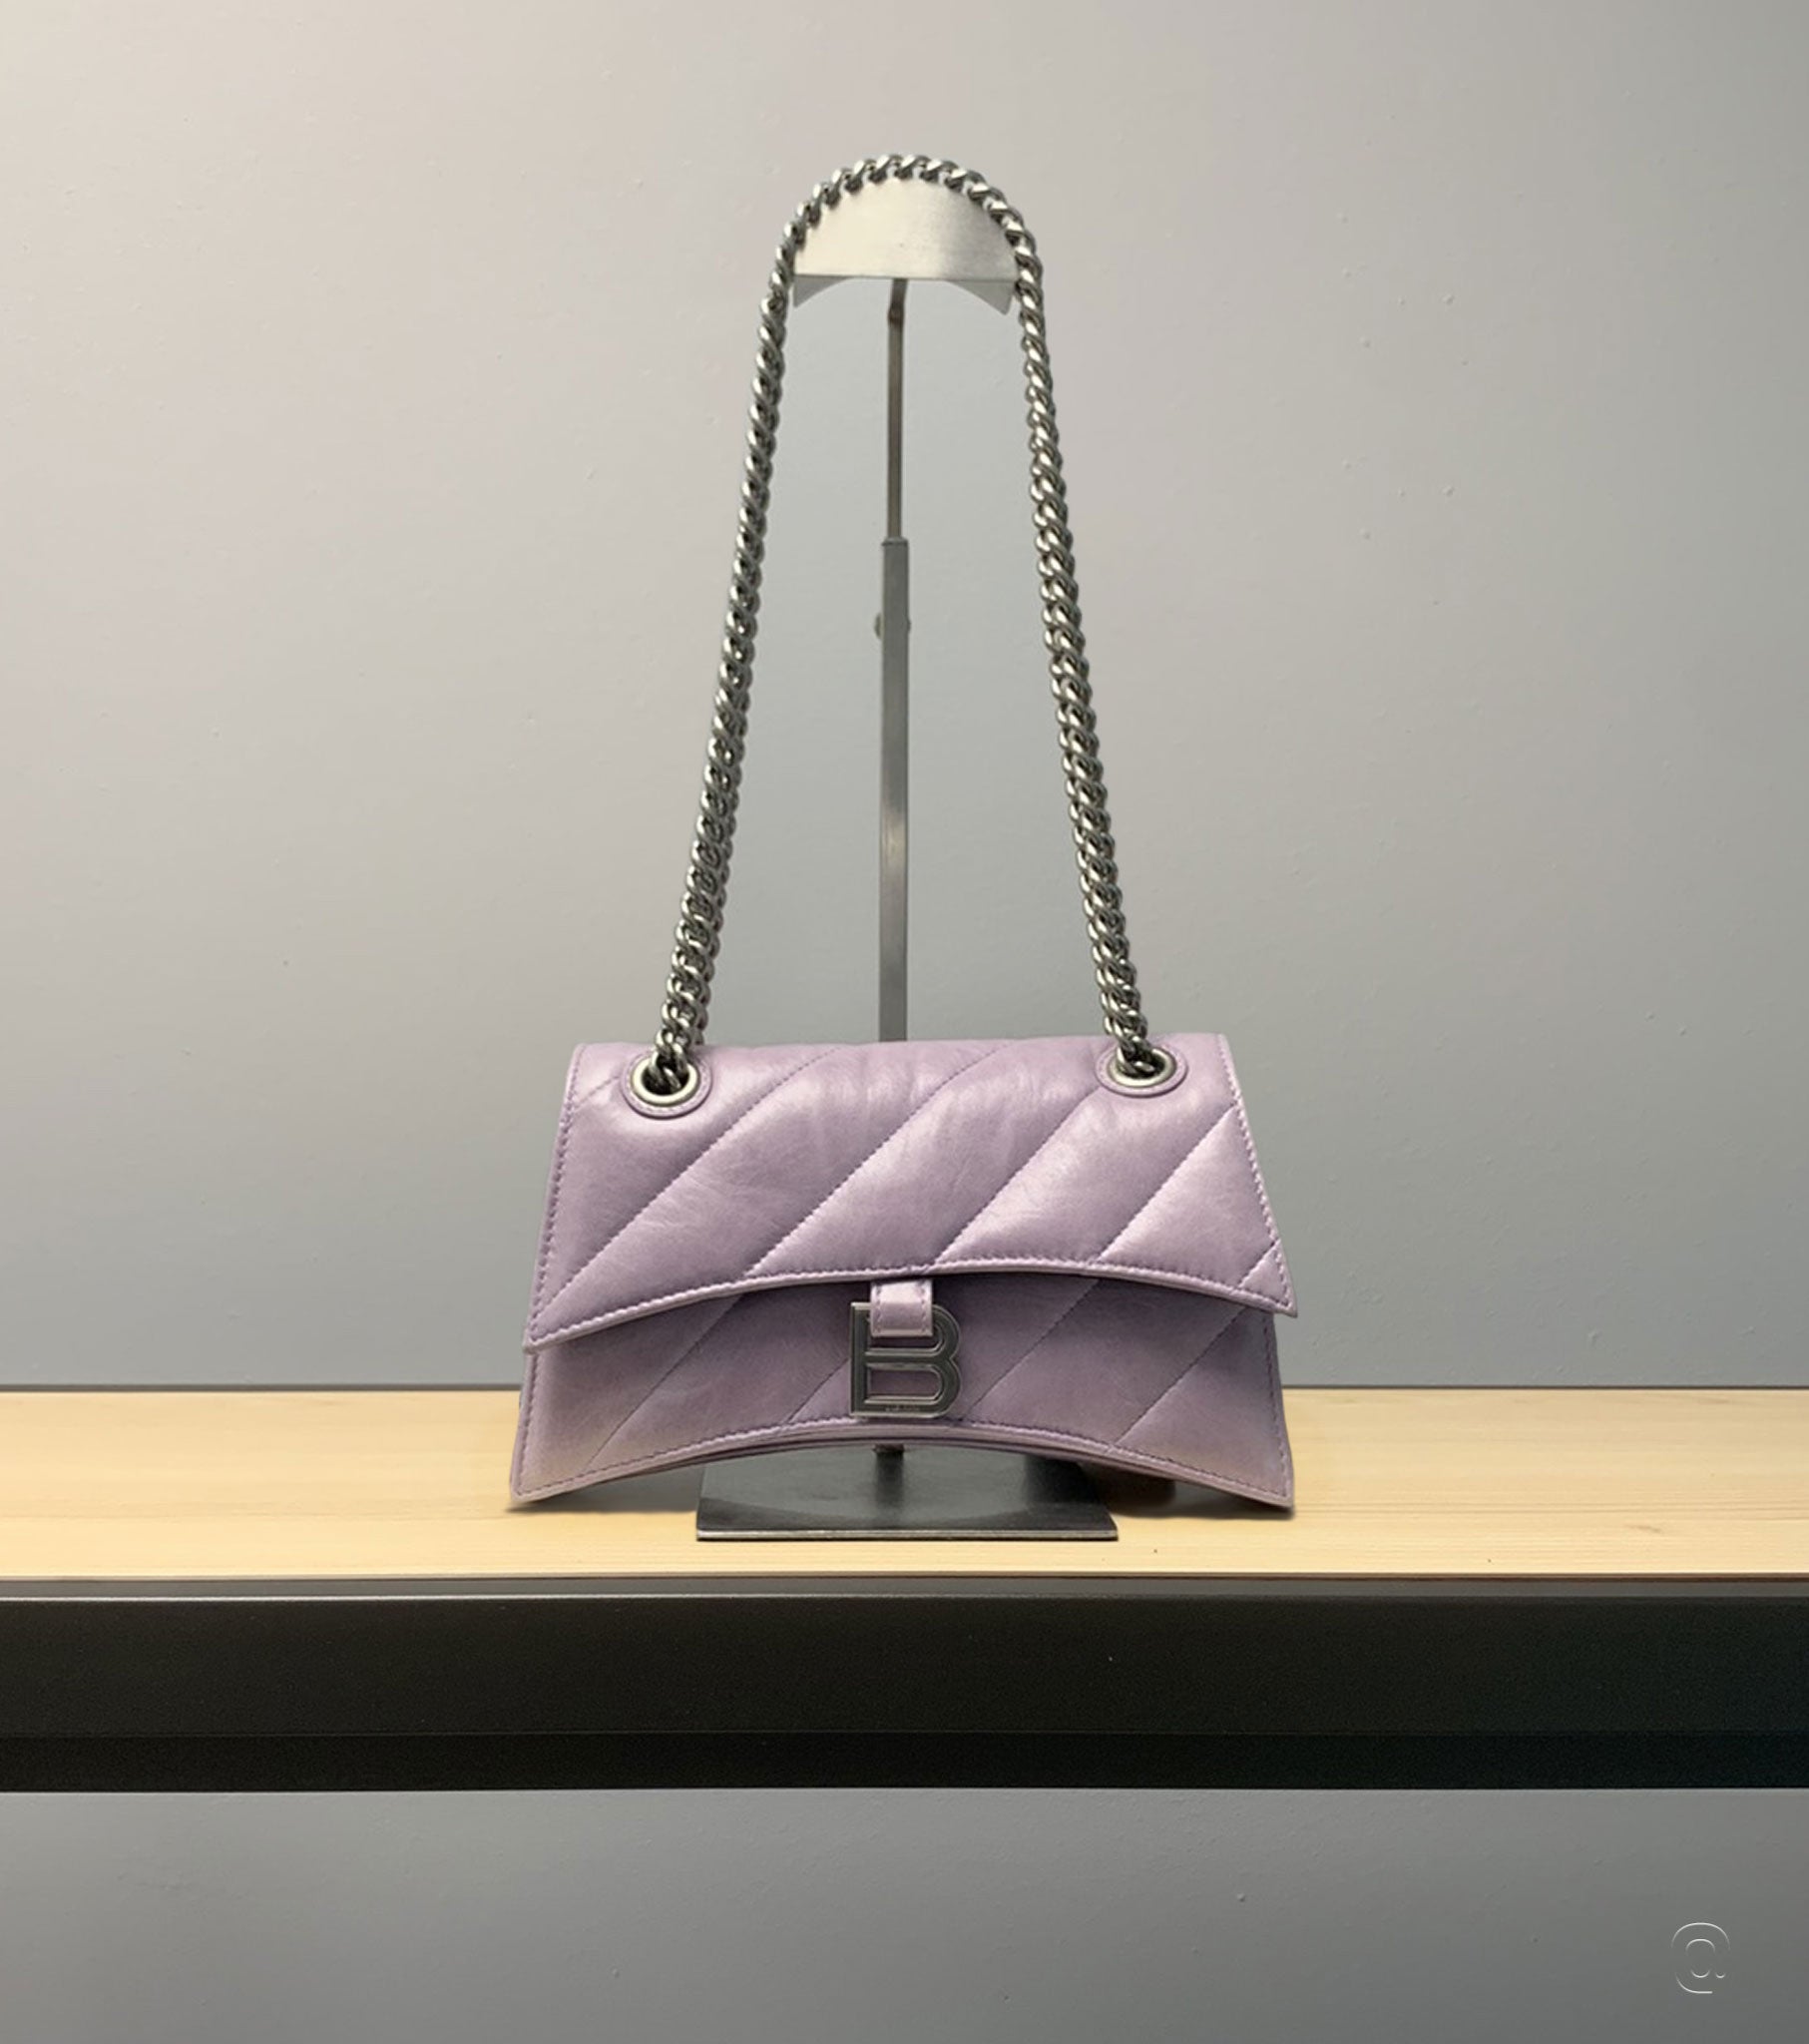 Lilac Leather Bag